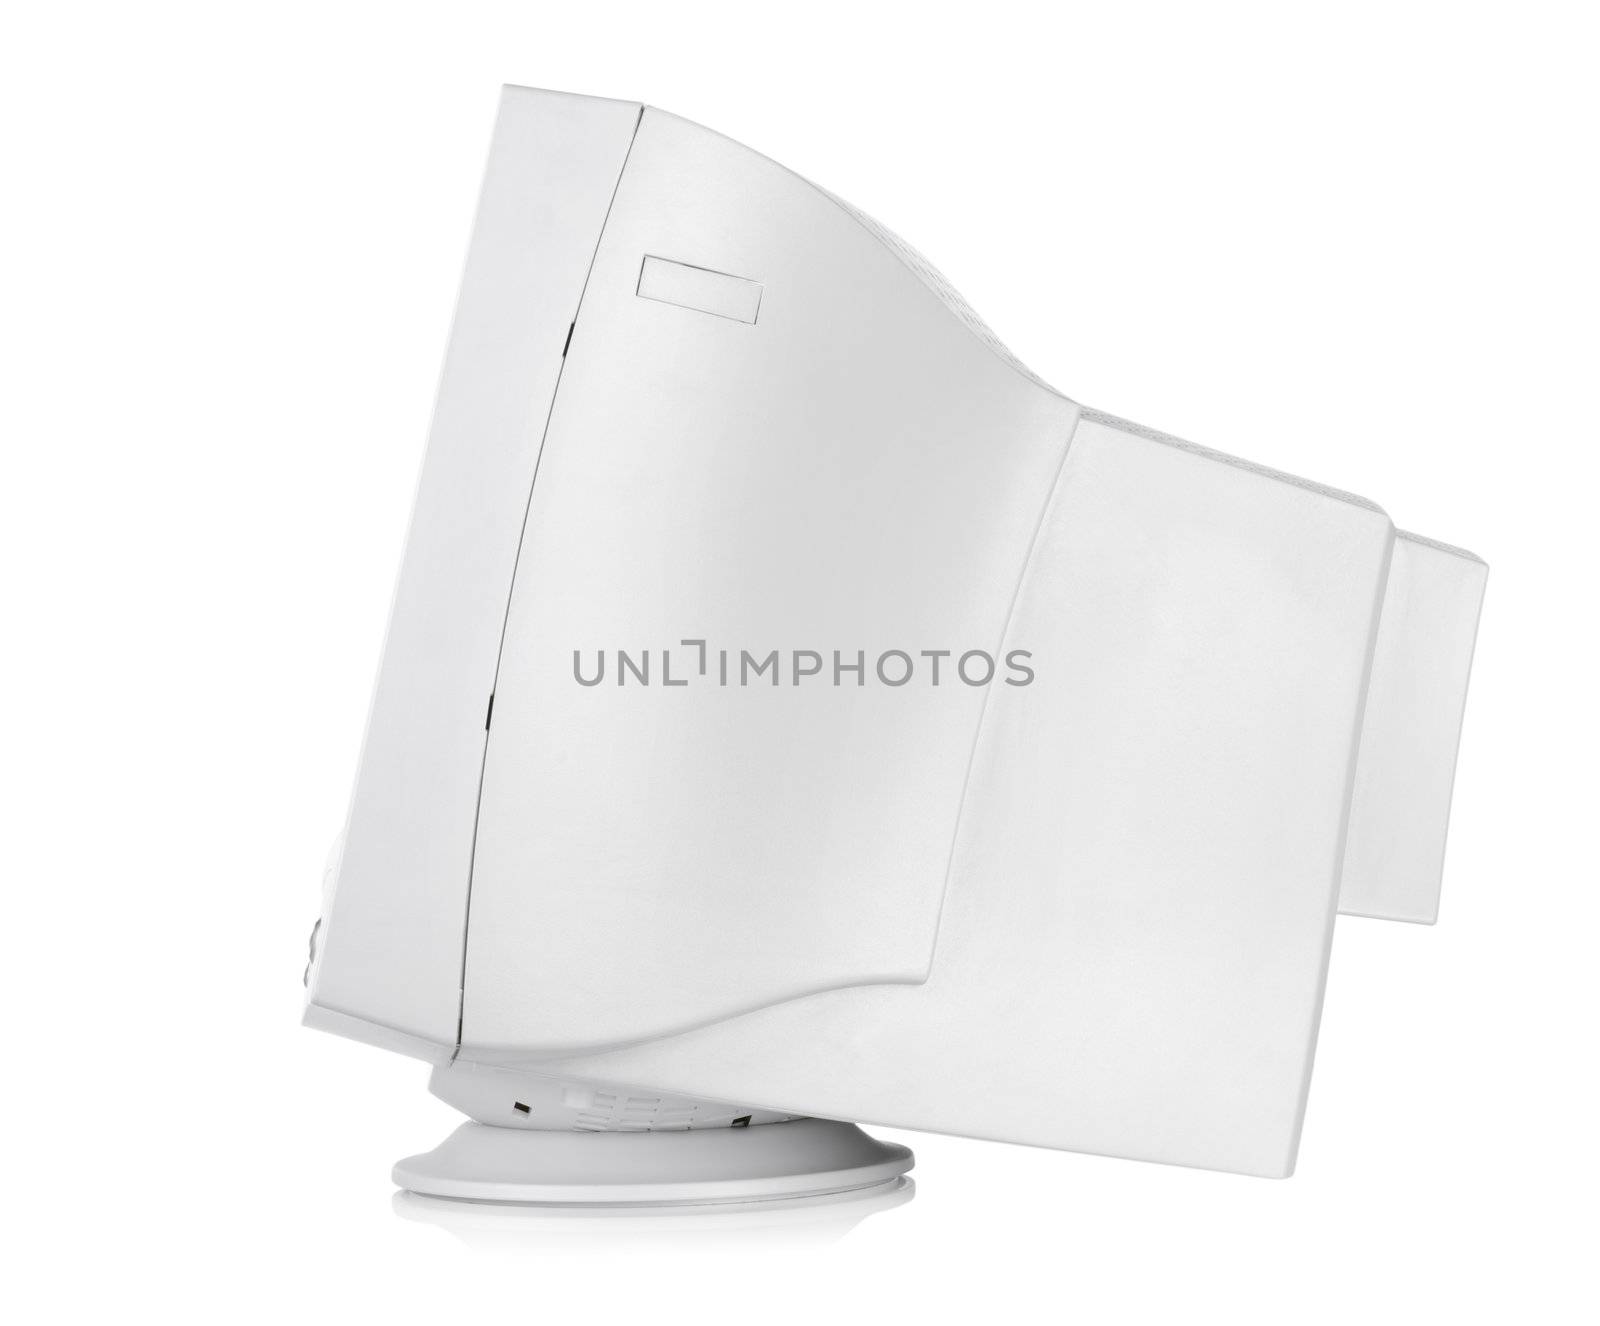 CRT monitor isolated on a white background. Clipping path